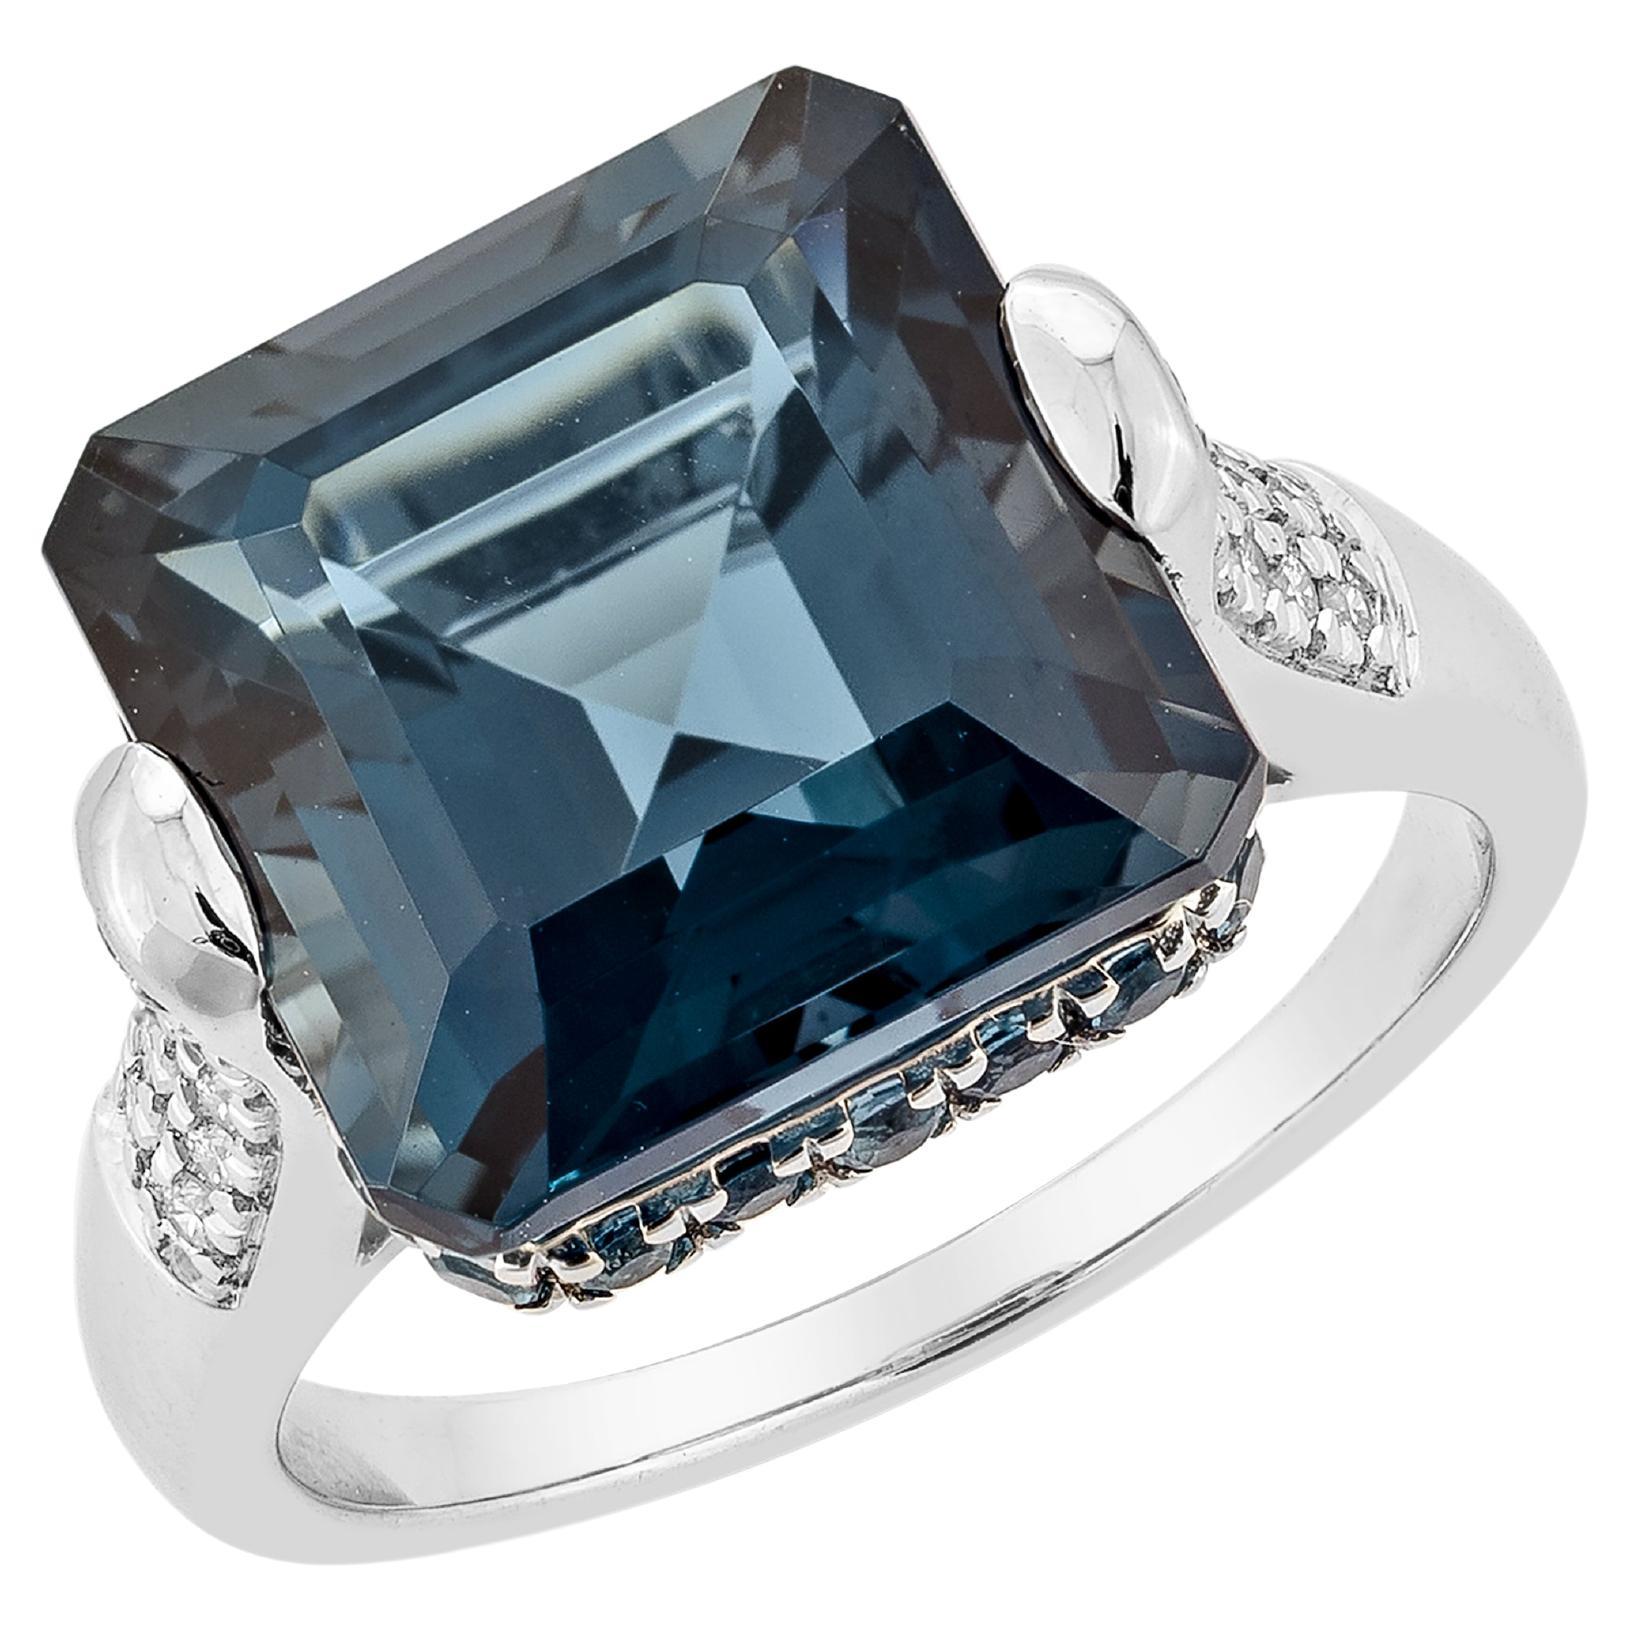 10.81 Carat London Blue Topaz Fancy Ring in 18KWG with White Diamond. For Sale